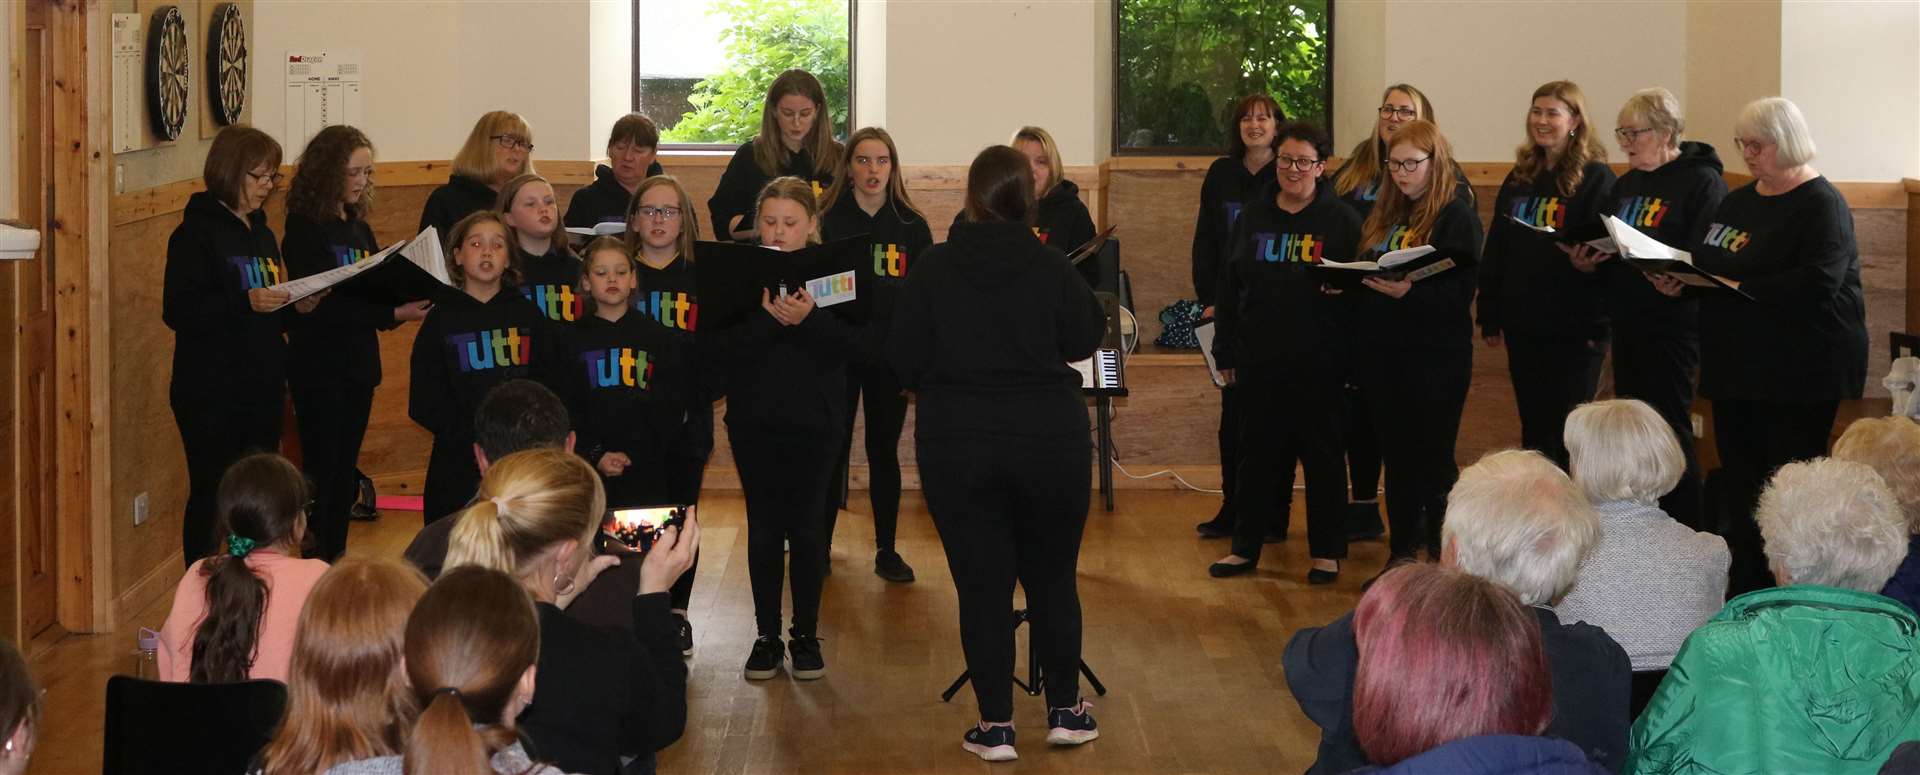 The Tutti Choir at Halkirk Youth Club at the end-of-term presentation